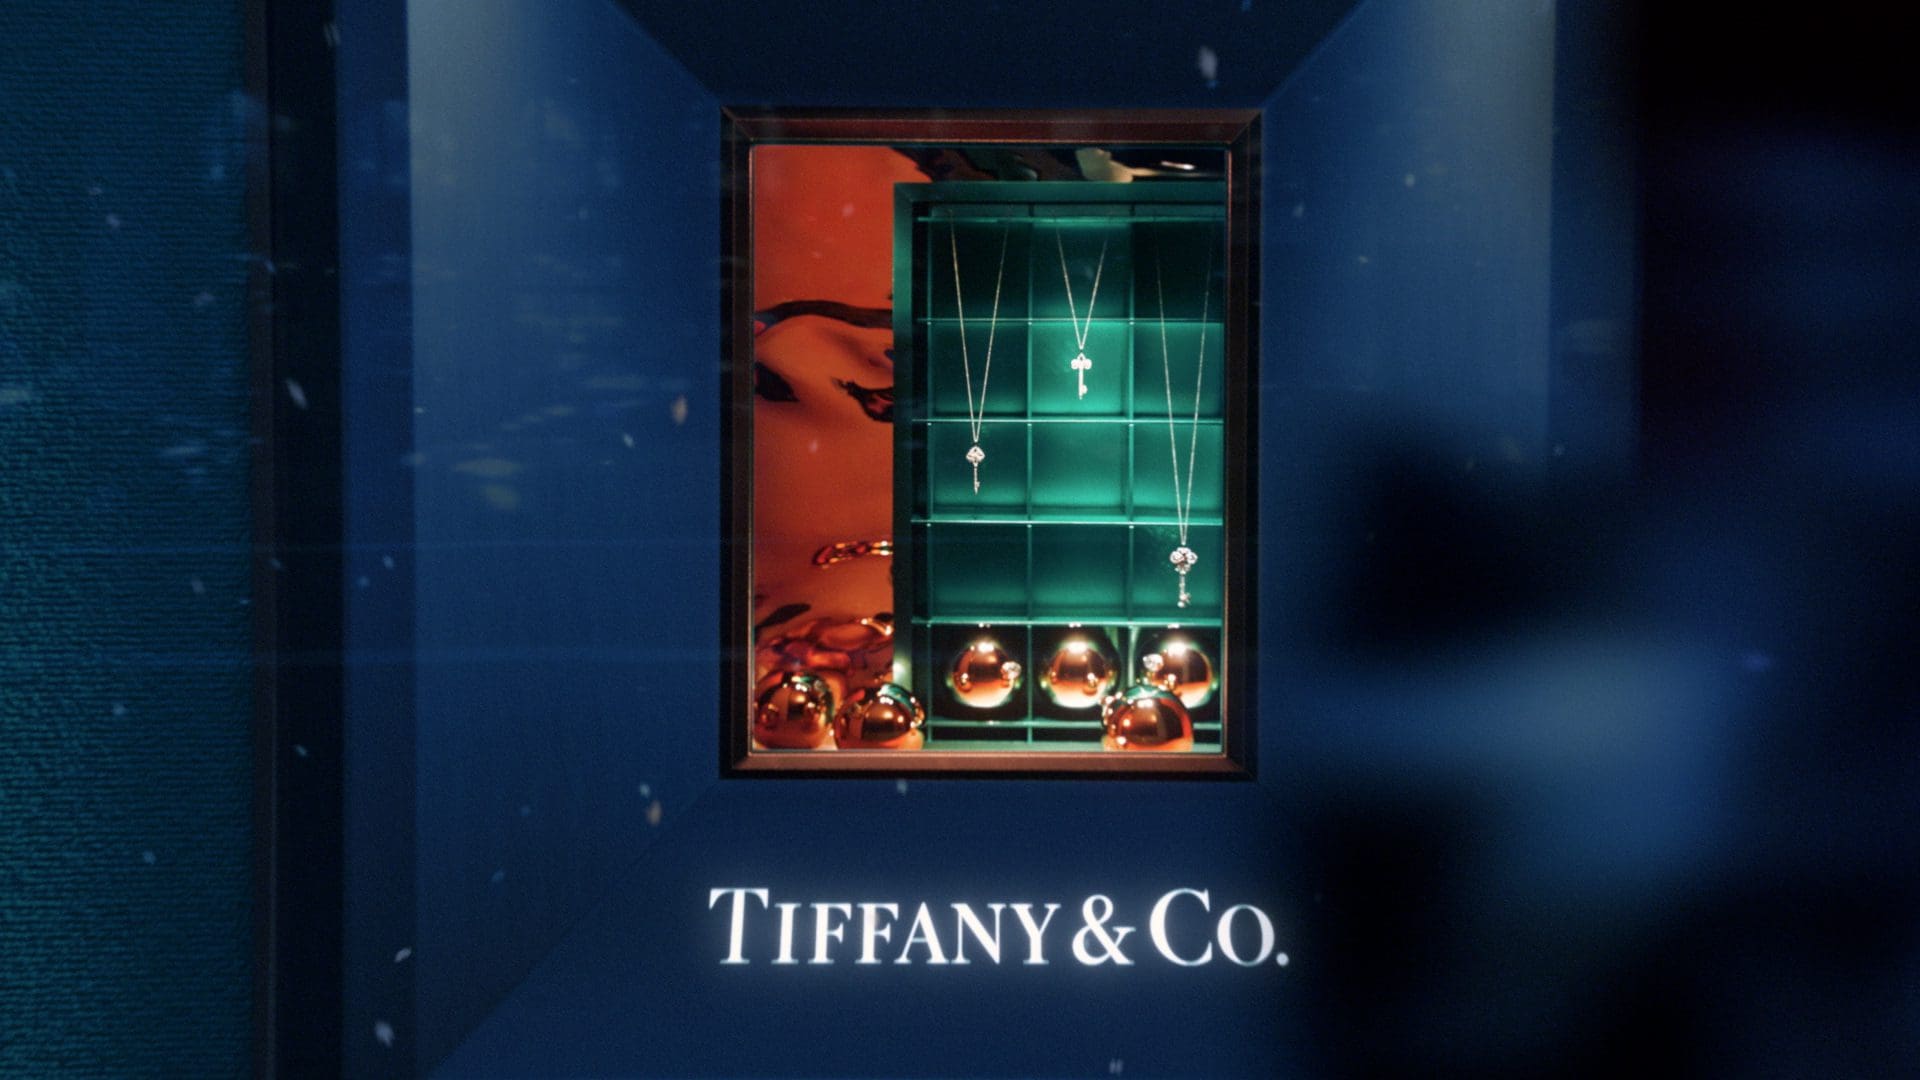 Elegant Tiffany & Co. window display featuring a selection of fine jewelry, including necklaces and pendants, set against a teal backdrop with the brand's signature in white text below.